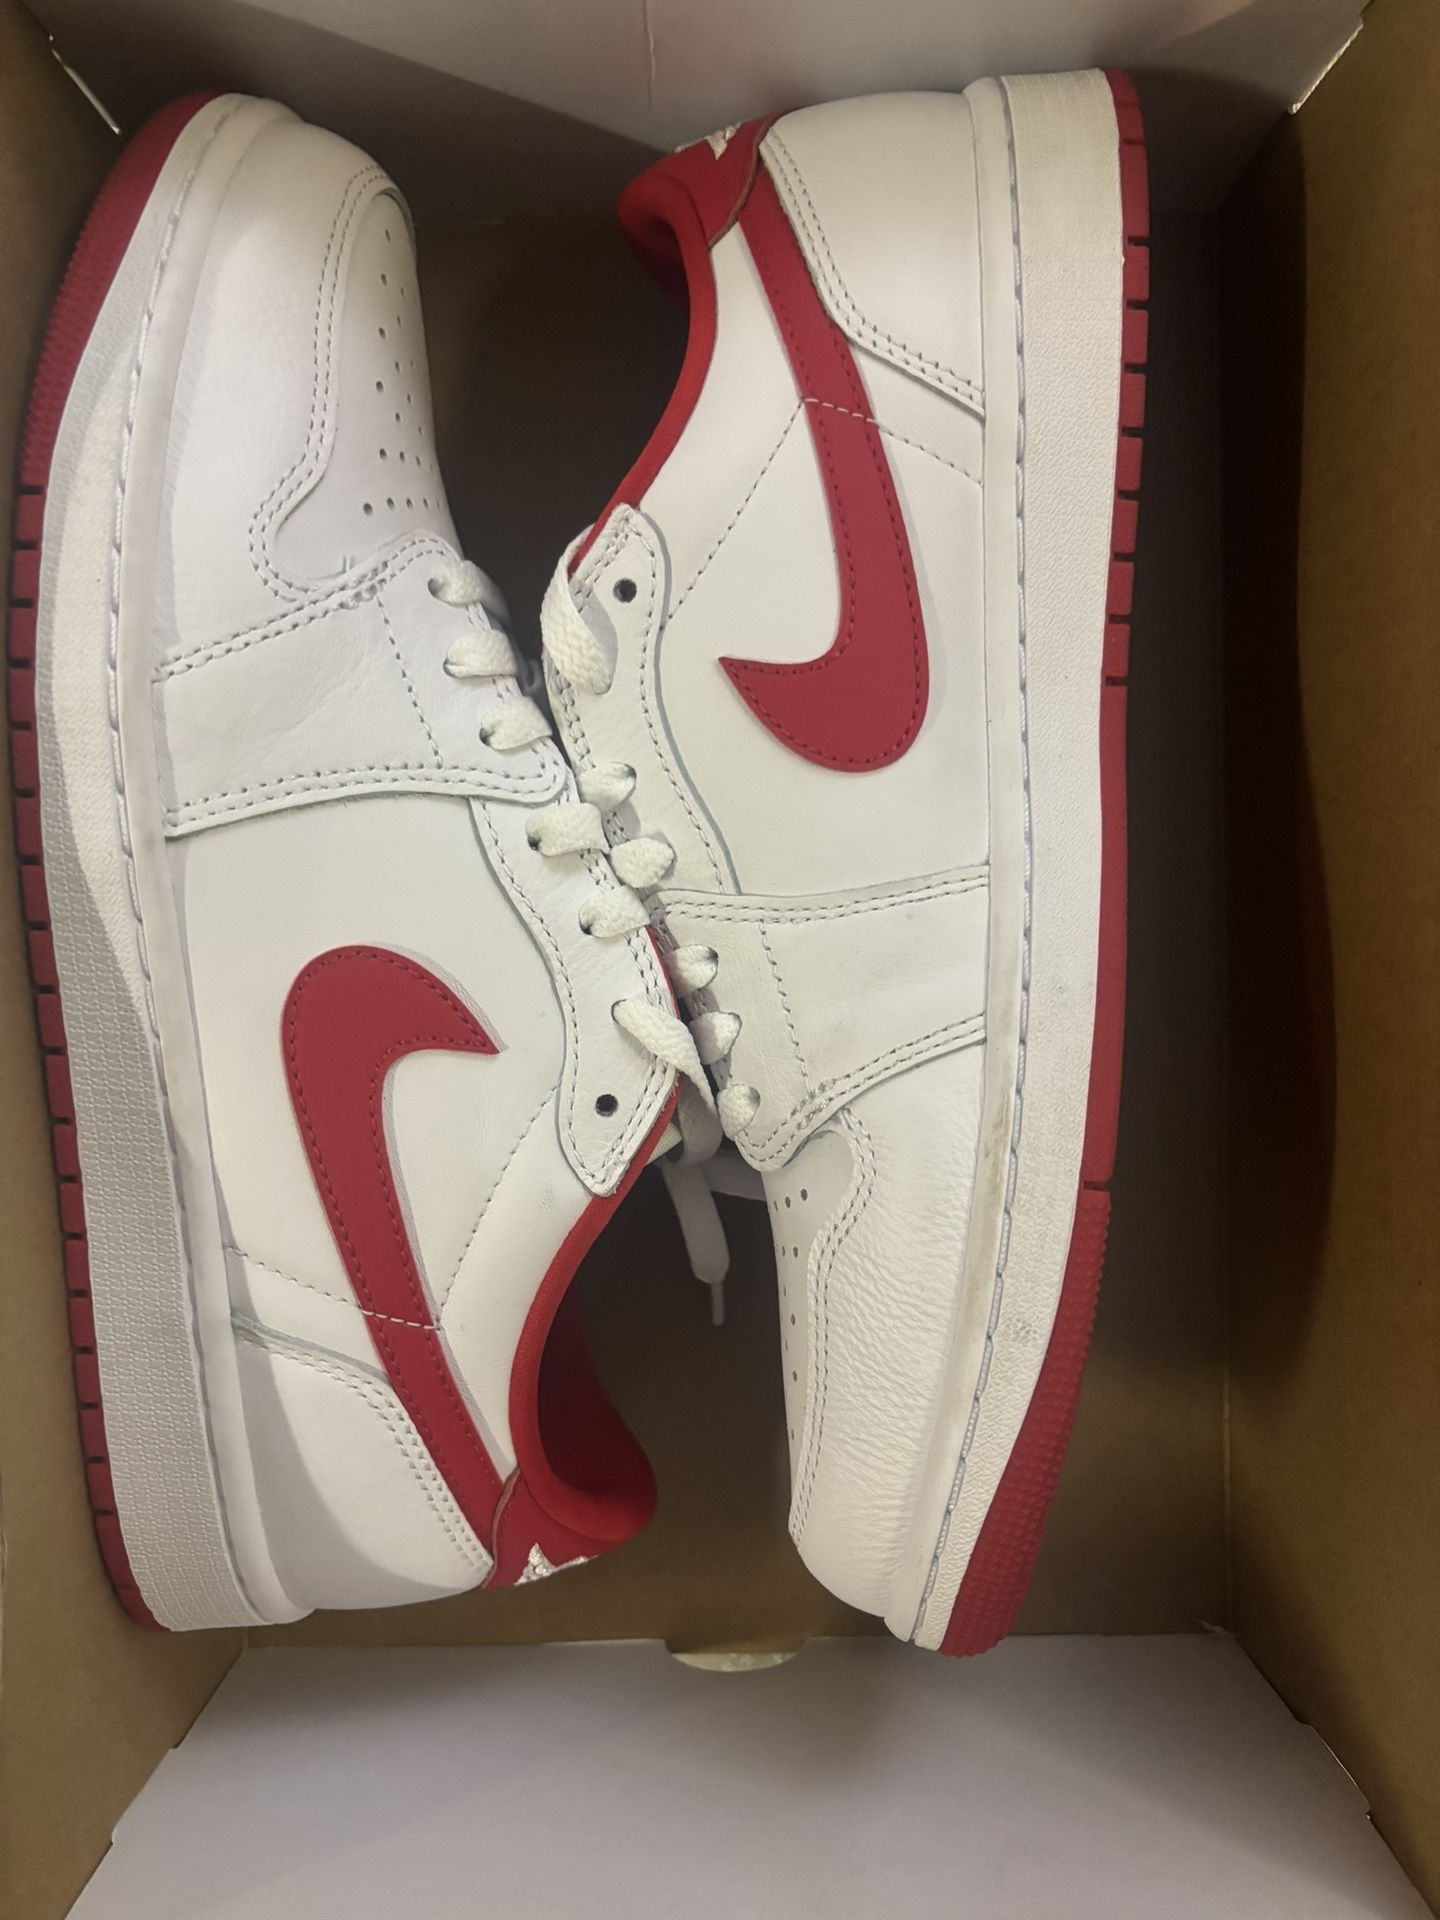 Jordan 1 Low “Varsity red” size(10.5M). Preowned worn 1x very clean.comes with Og all.  $75. Cash. 